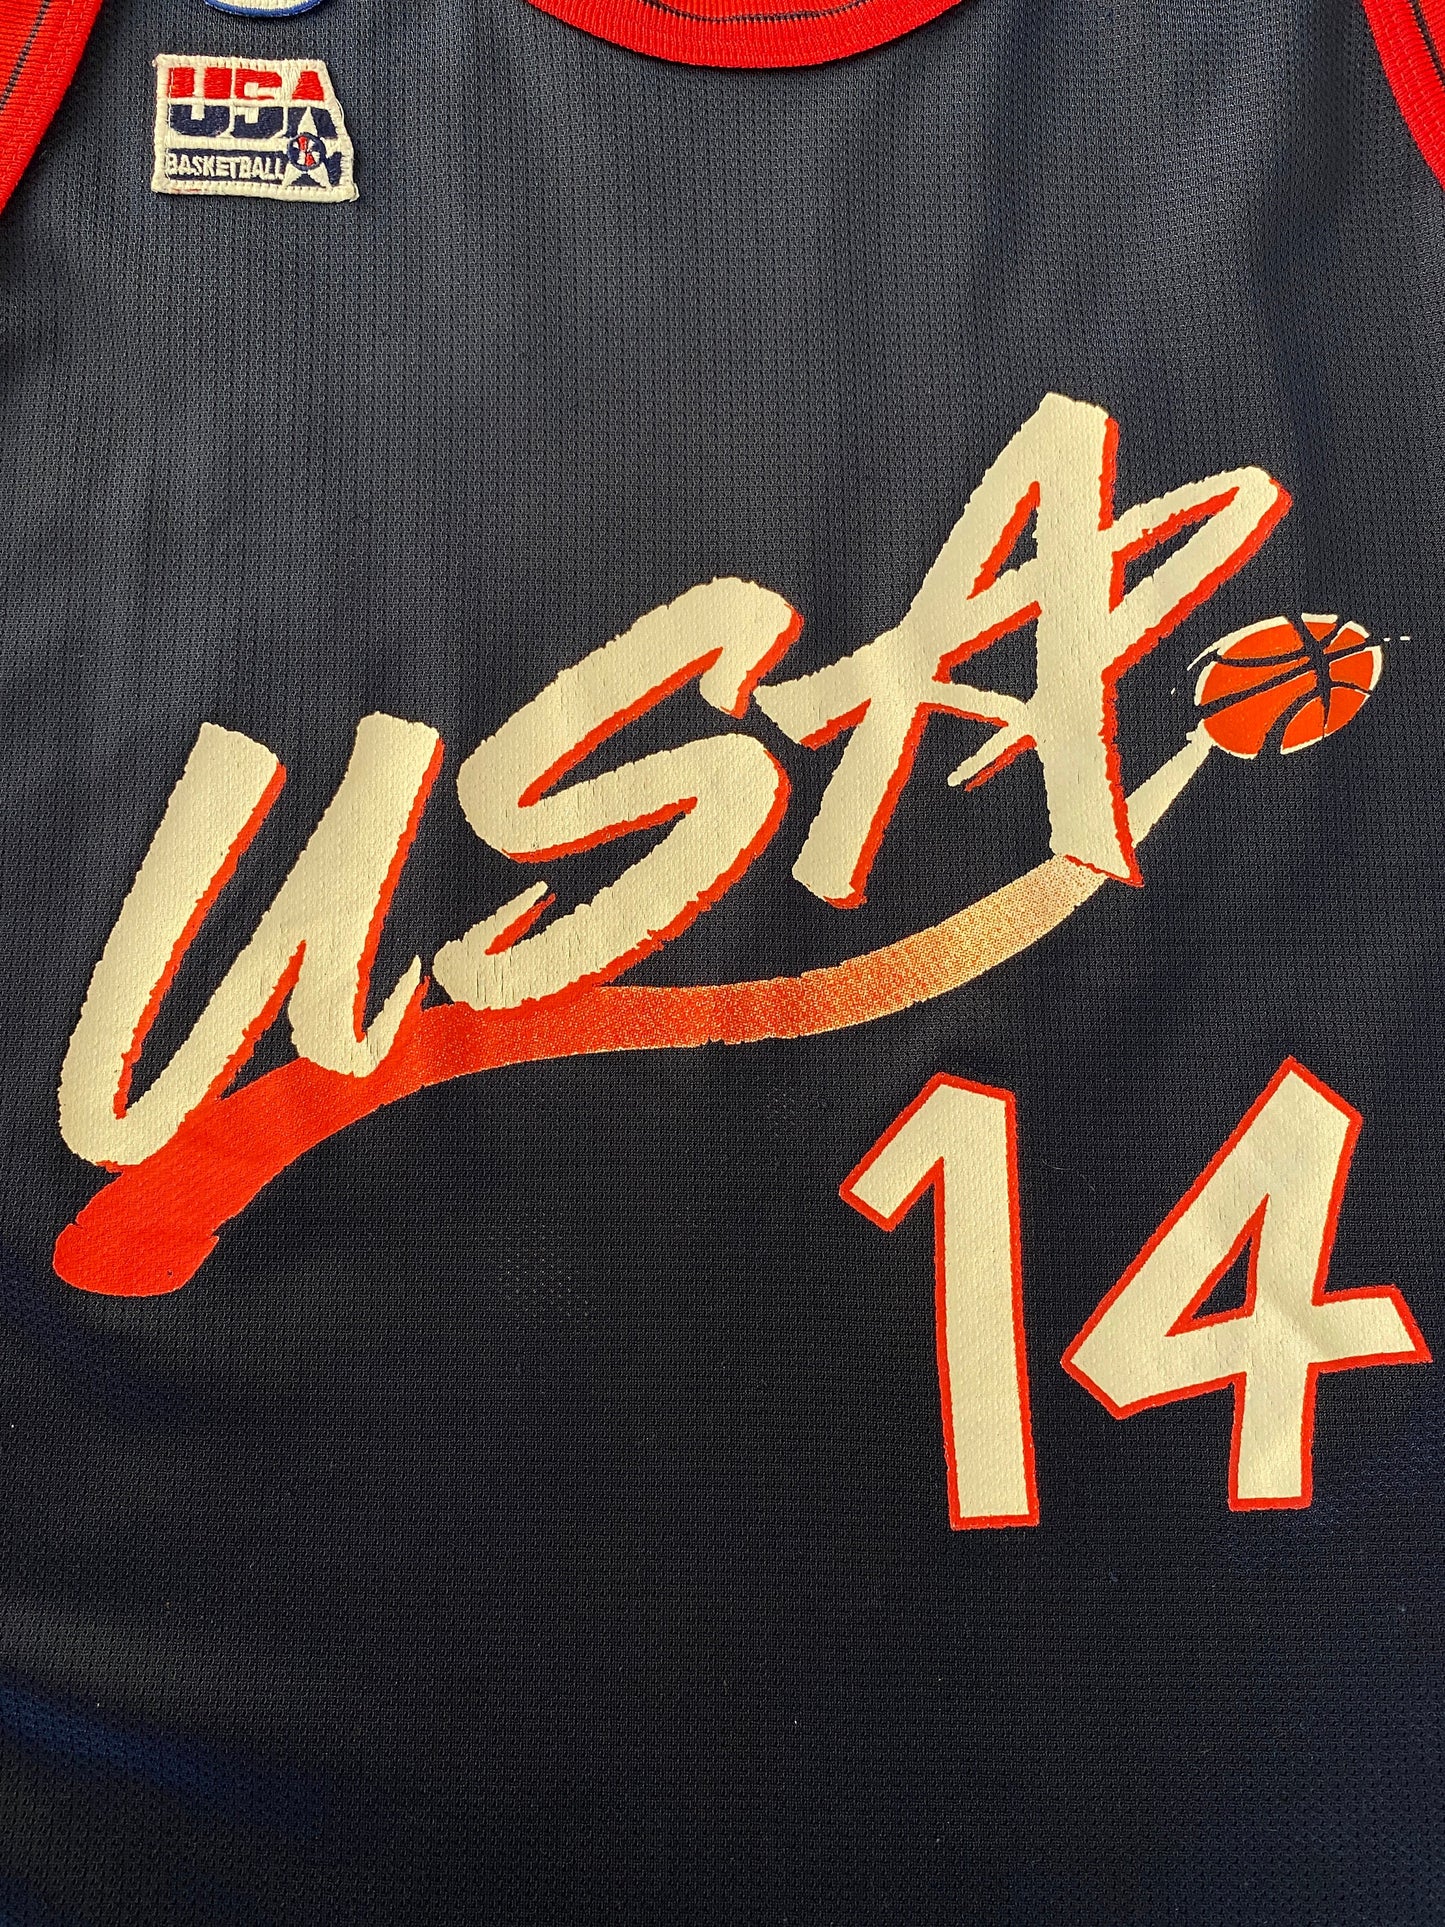 Size 48 David Robinson #14 Vintage Dream Team Olympic Champion NBA Jersey - Made in USA - front View